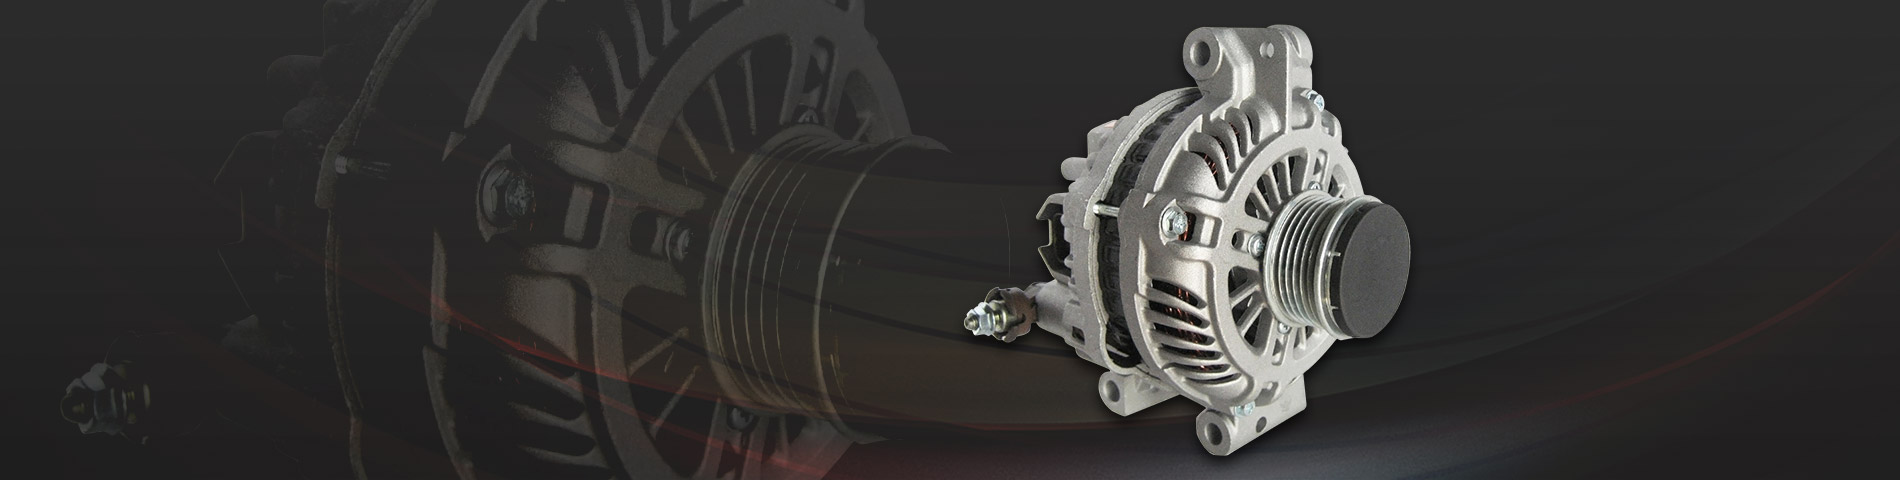 Dah Kee Co., Ltd. An Expert in Manufacturing Alternators, Starters, and Ignition Distributors